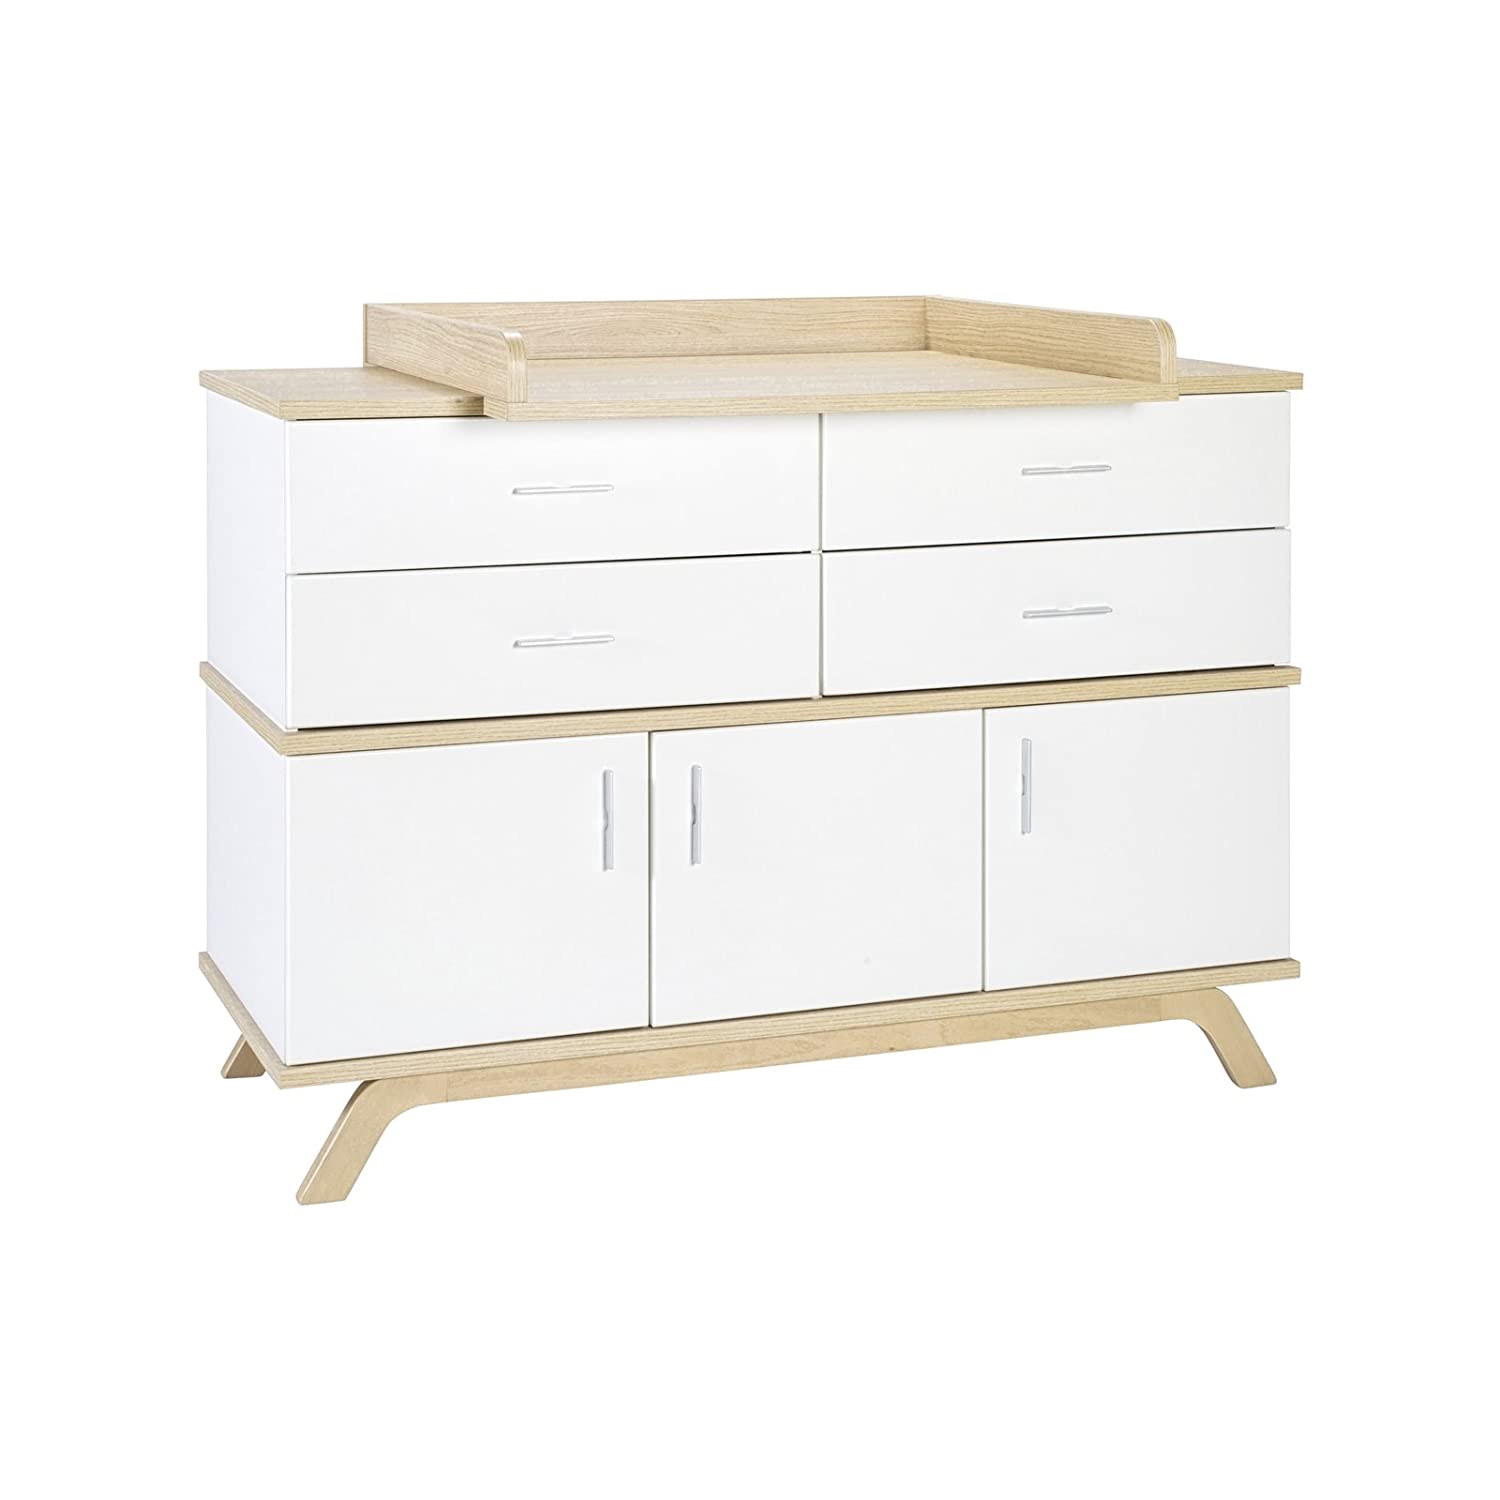 Schardt Changing Table Vicky Oak 3 Door, 4 Drawers, Vicenza White/Oak